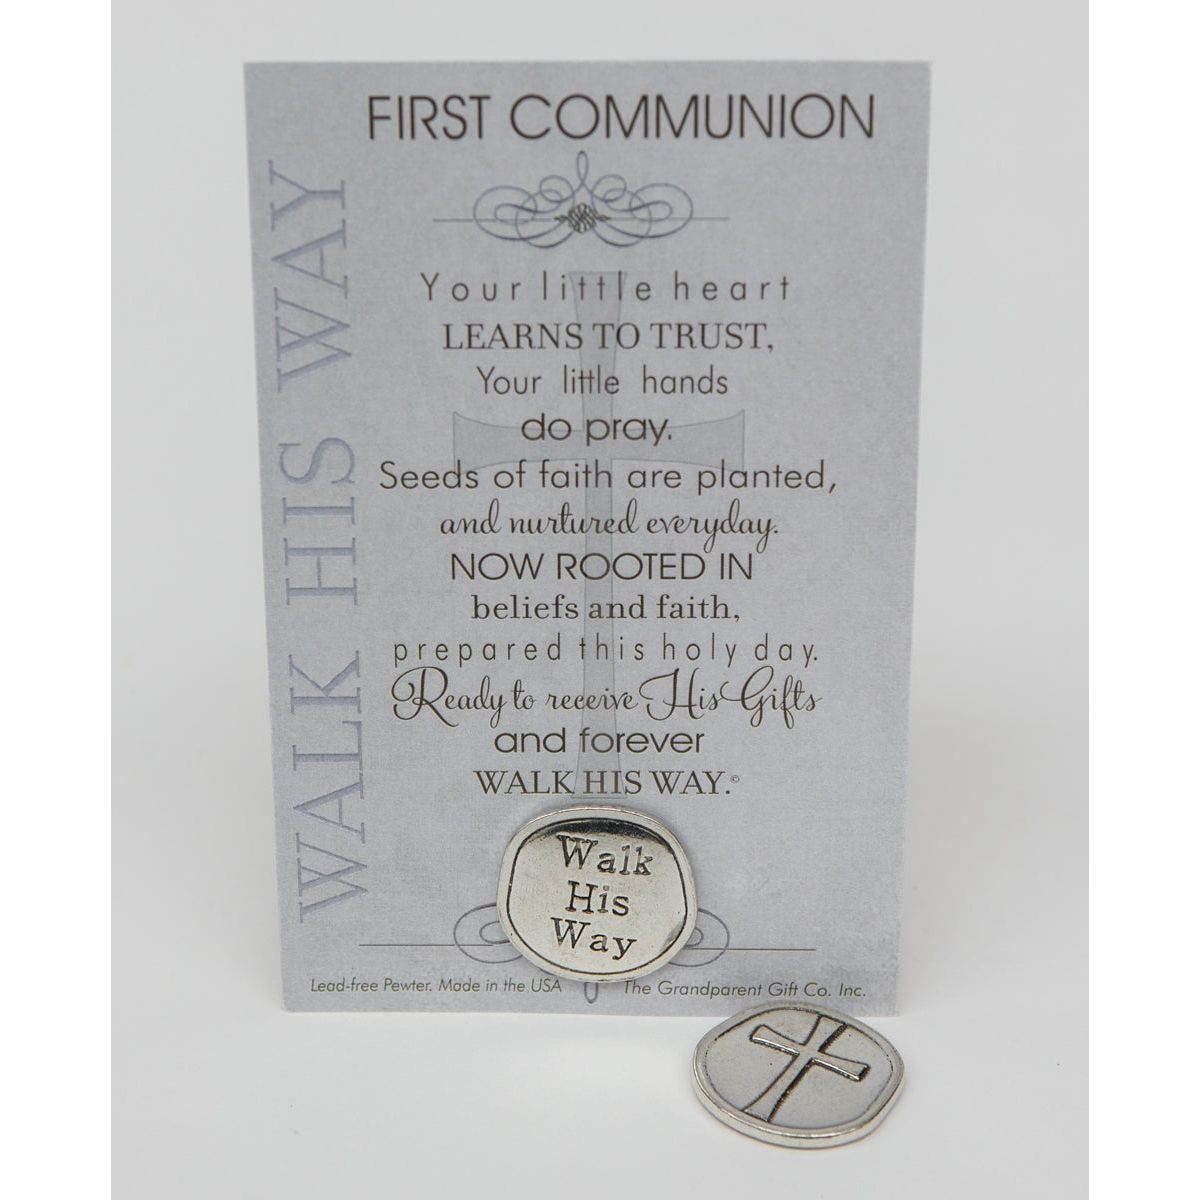 First Communion Gift: Handmade pewter coin with "Walk His Way" on one side and a cross on the other, packaged in a clear bag with "First Communion" poem.